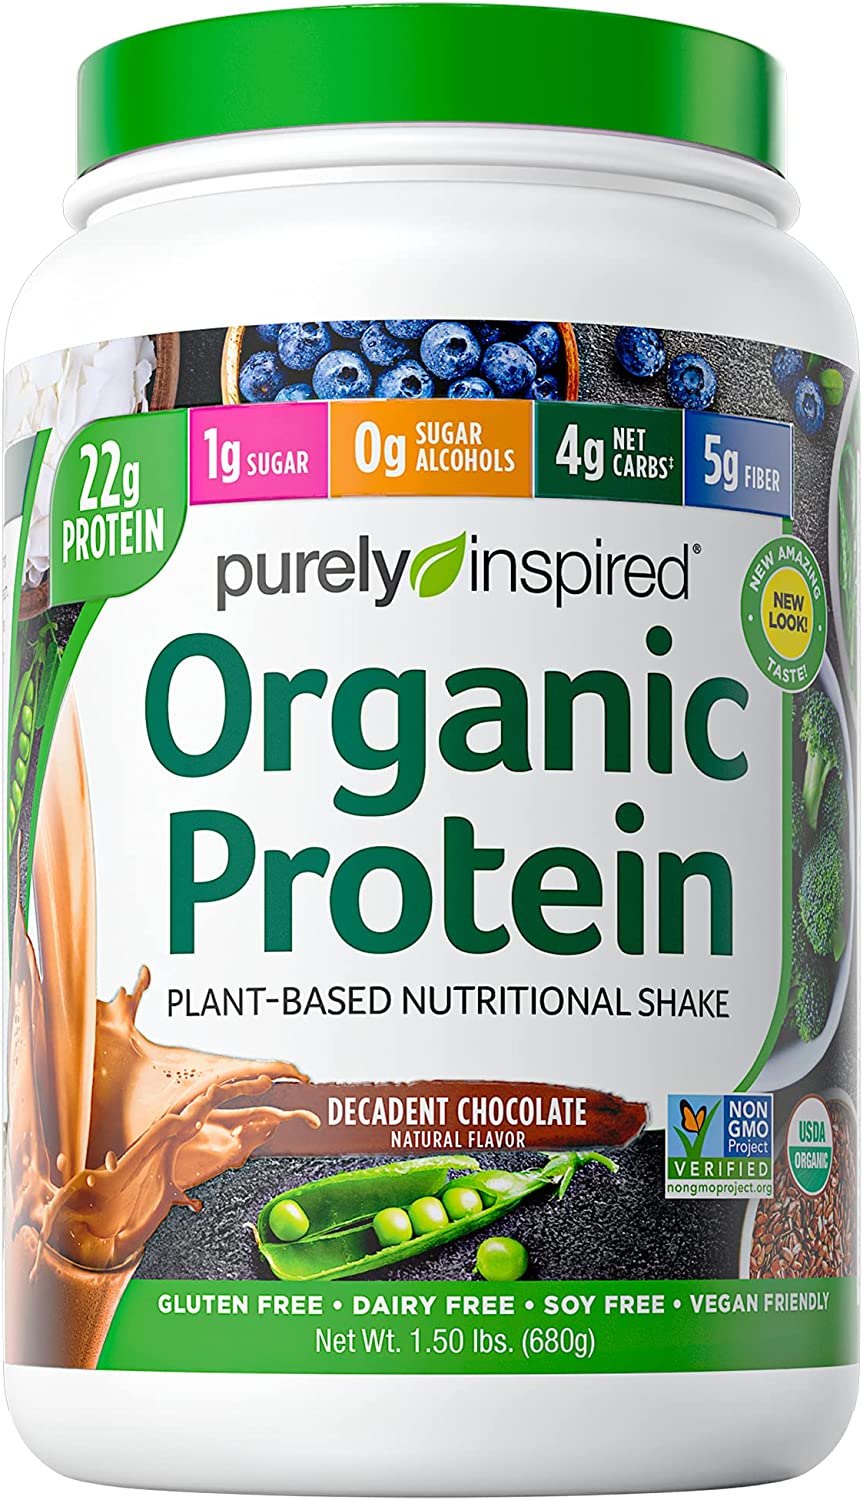 Plant Based Protein Powder | Purely Inspired Organic Protein Powder | Vegan Protein Powder for Women & Men | 22G of Plant Protein | Pea Protein Powder | Vanilla Protein Powder, 1.5 Lb (17 Servings)